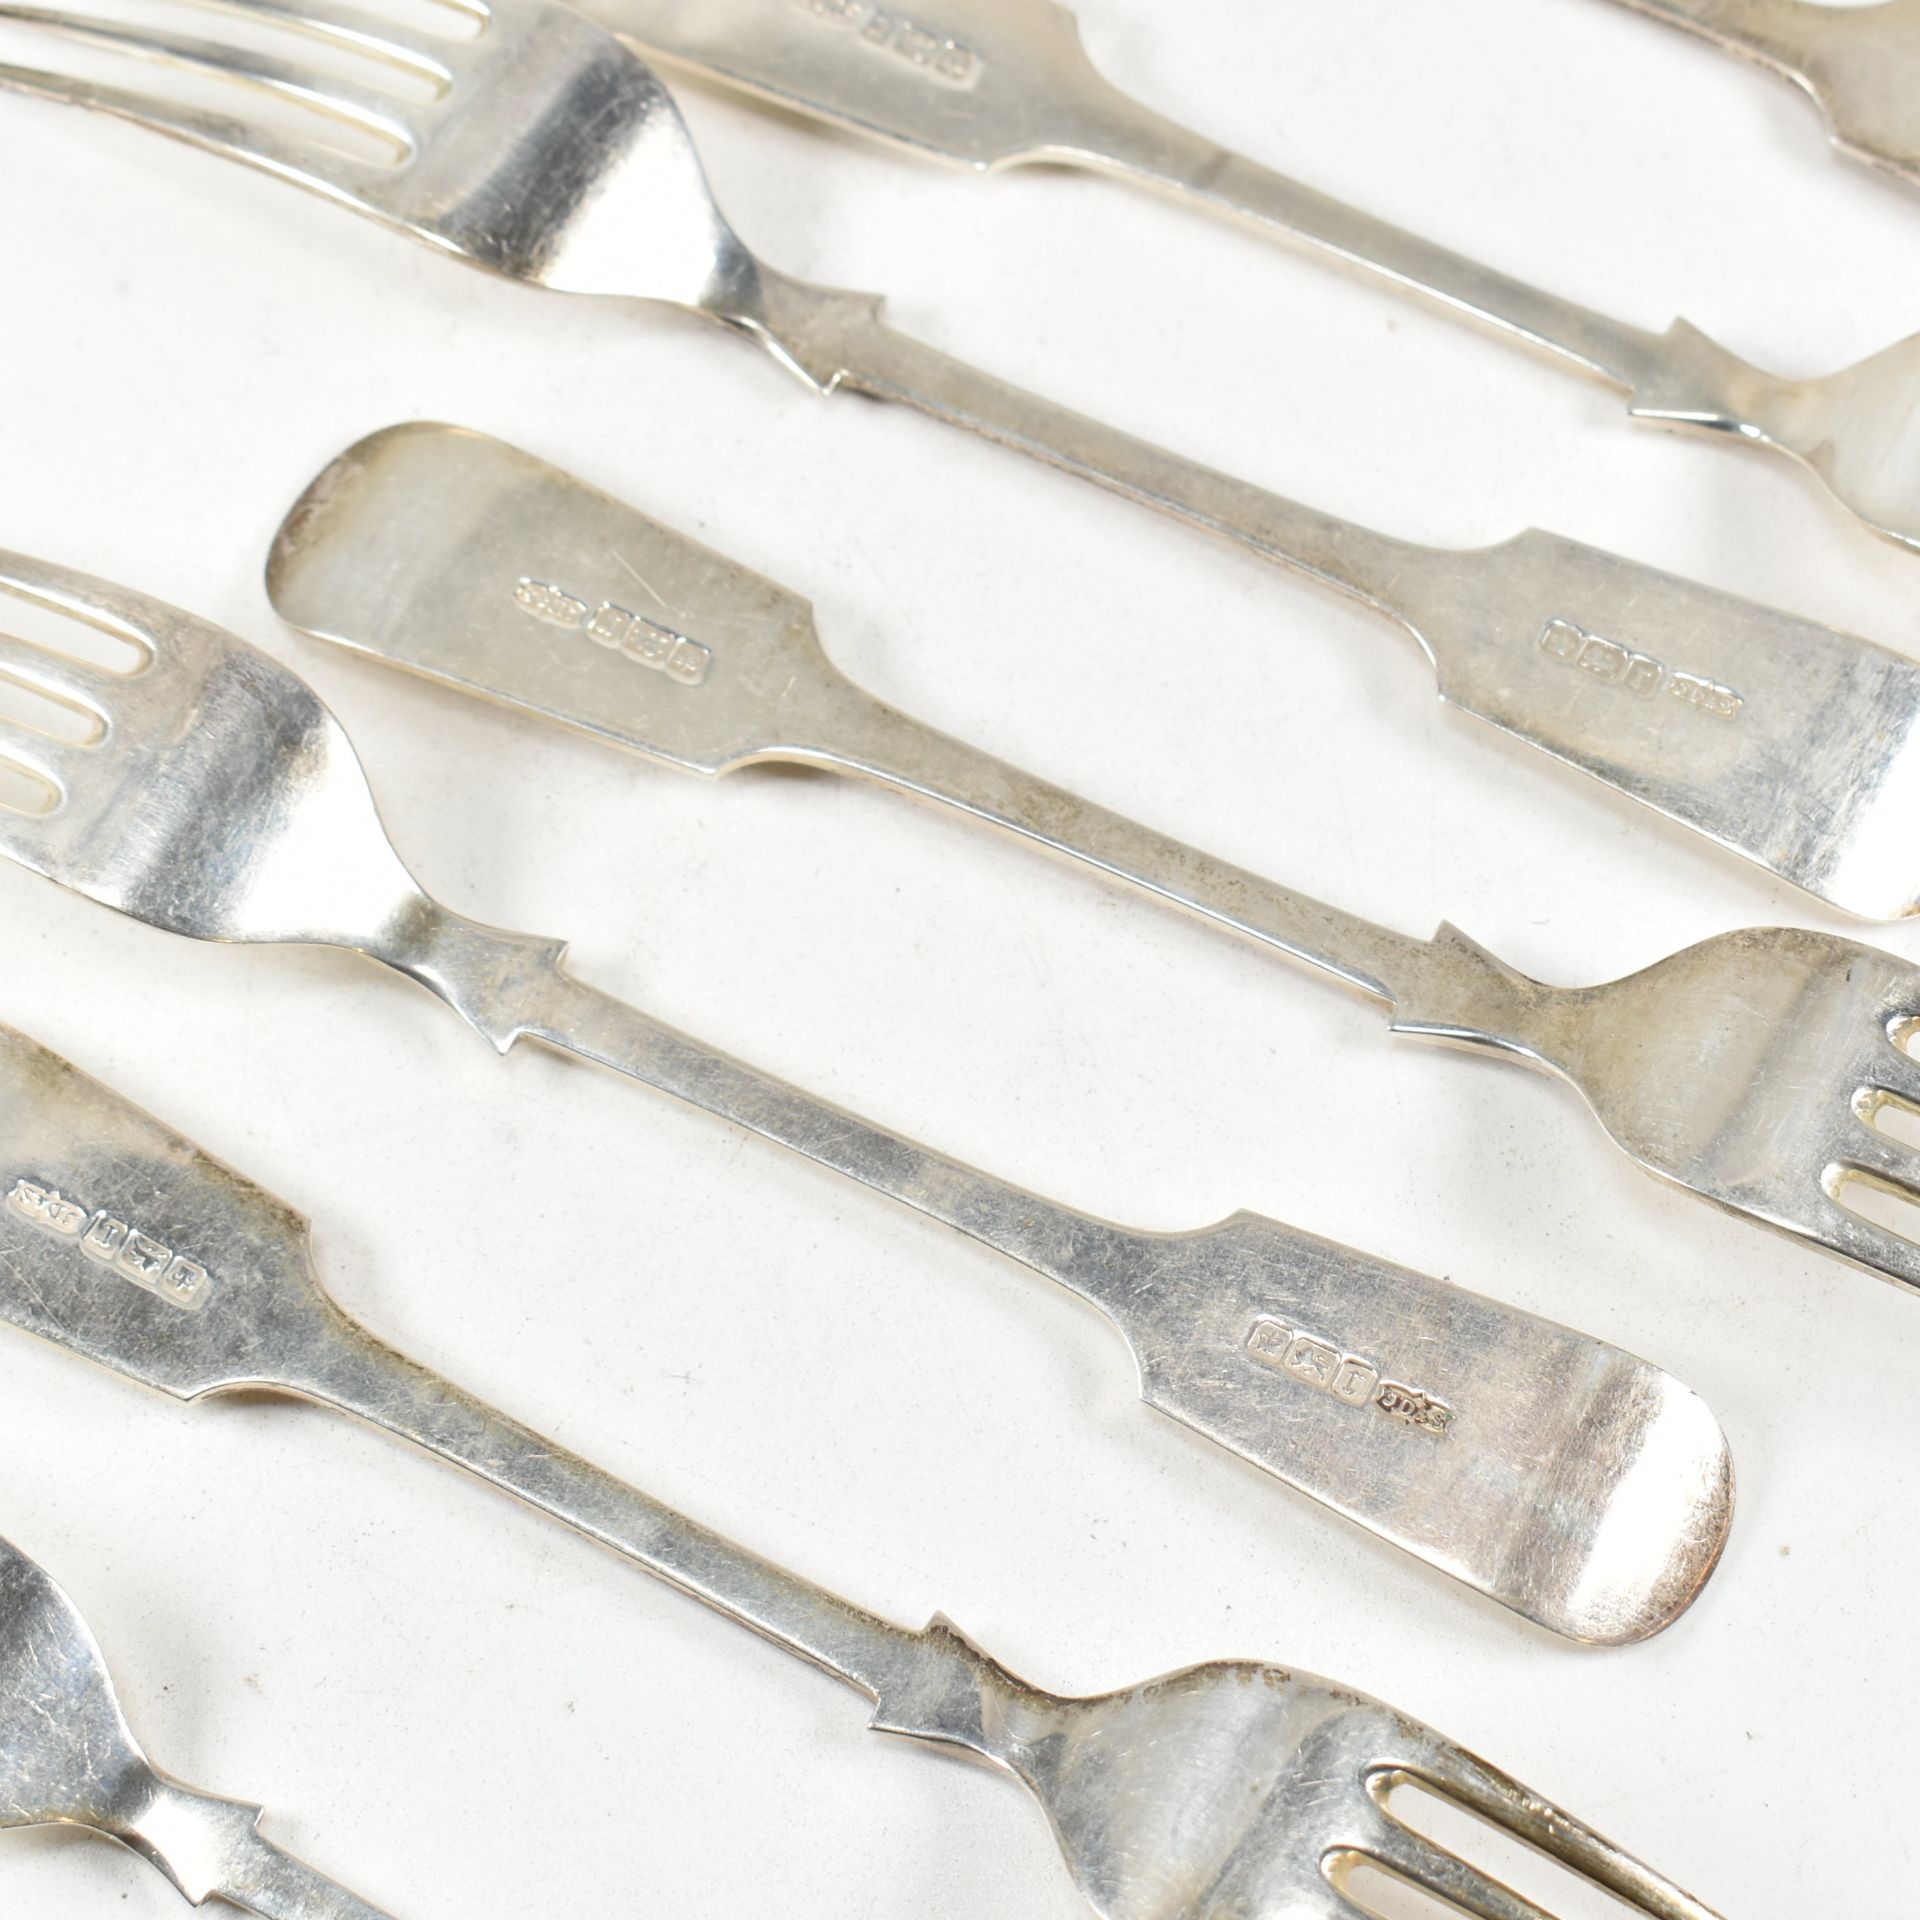 SET OF 7 EARLY 20TH CENTURY HALLMARKED SILVER FORKS - Image 4 of 4